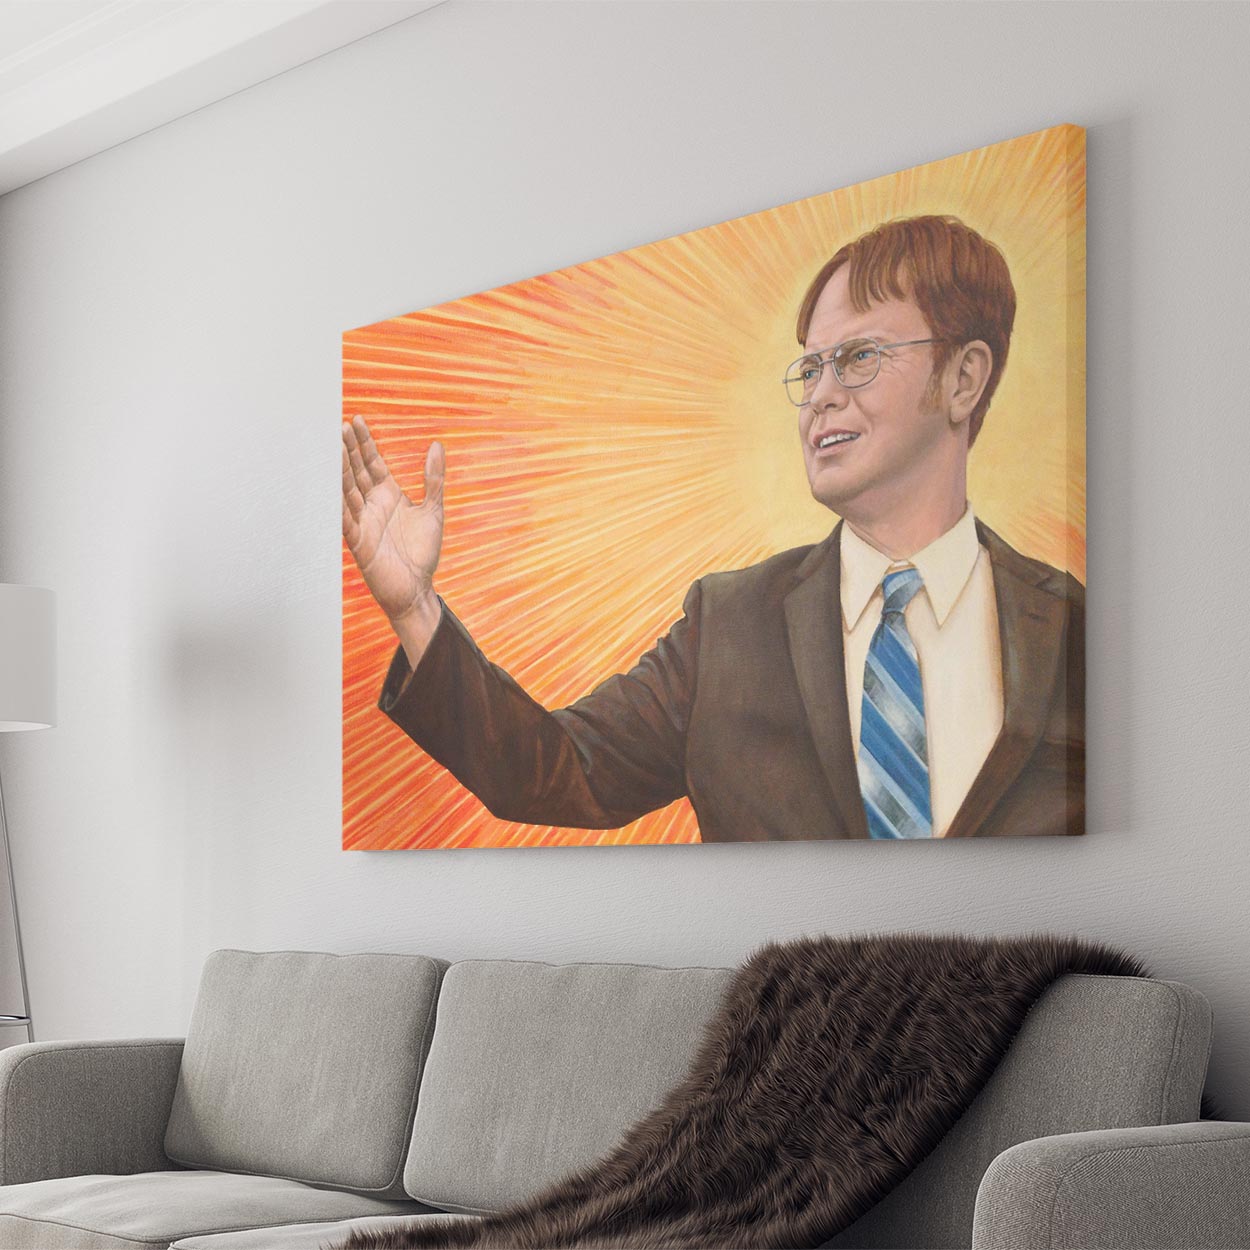 The Office Dwight Schrute Messiah